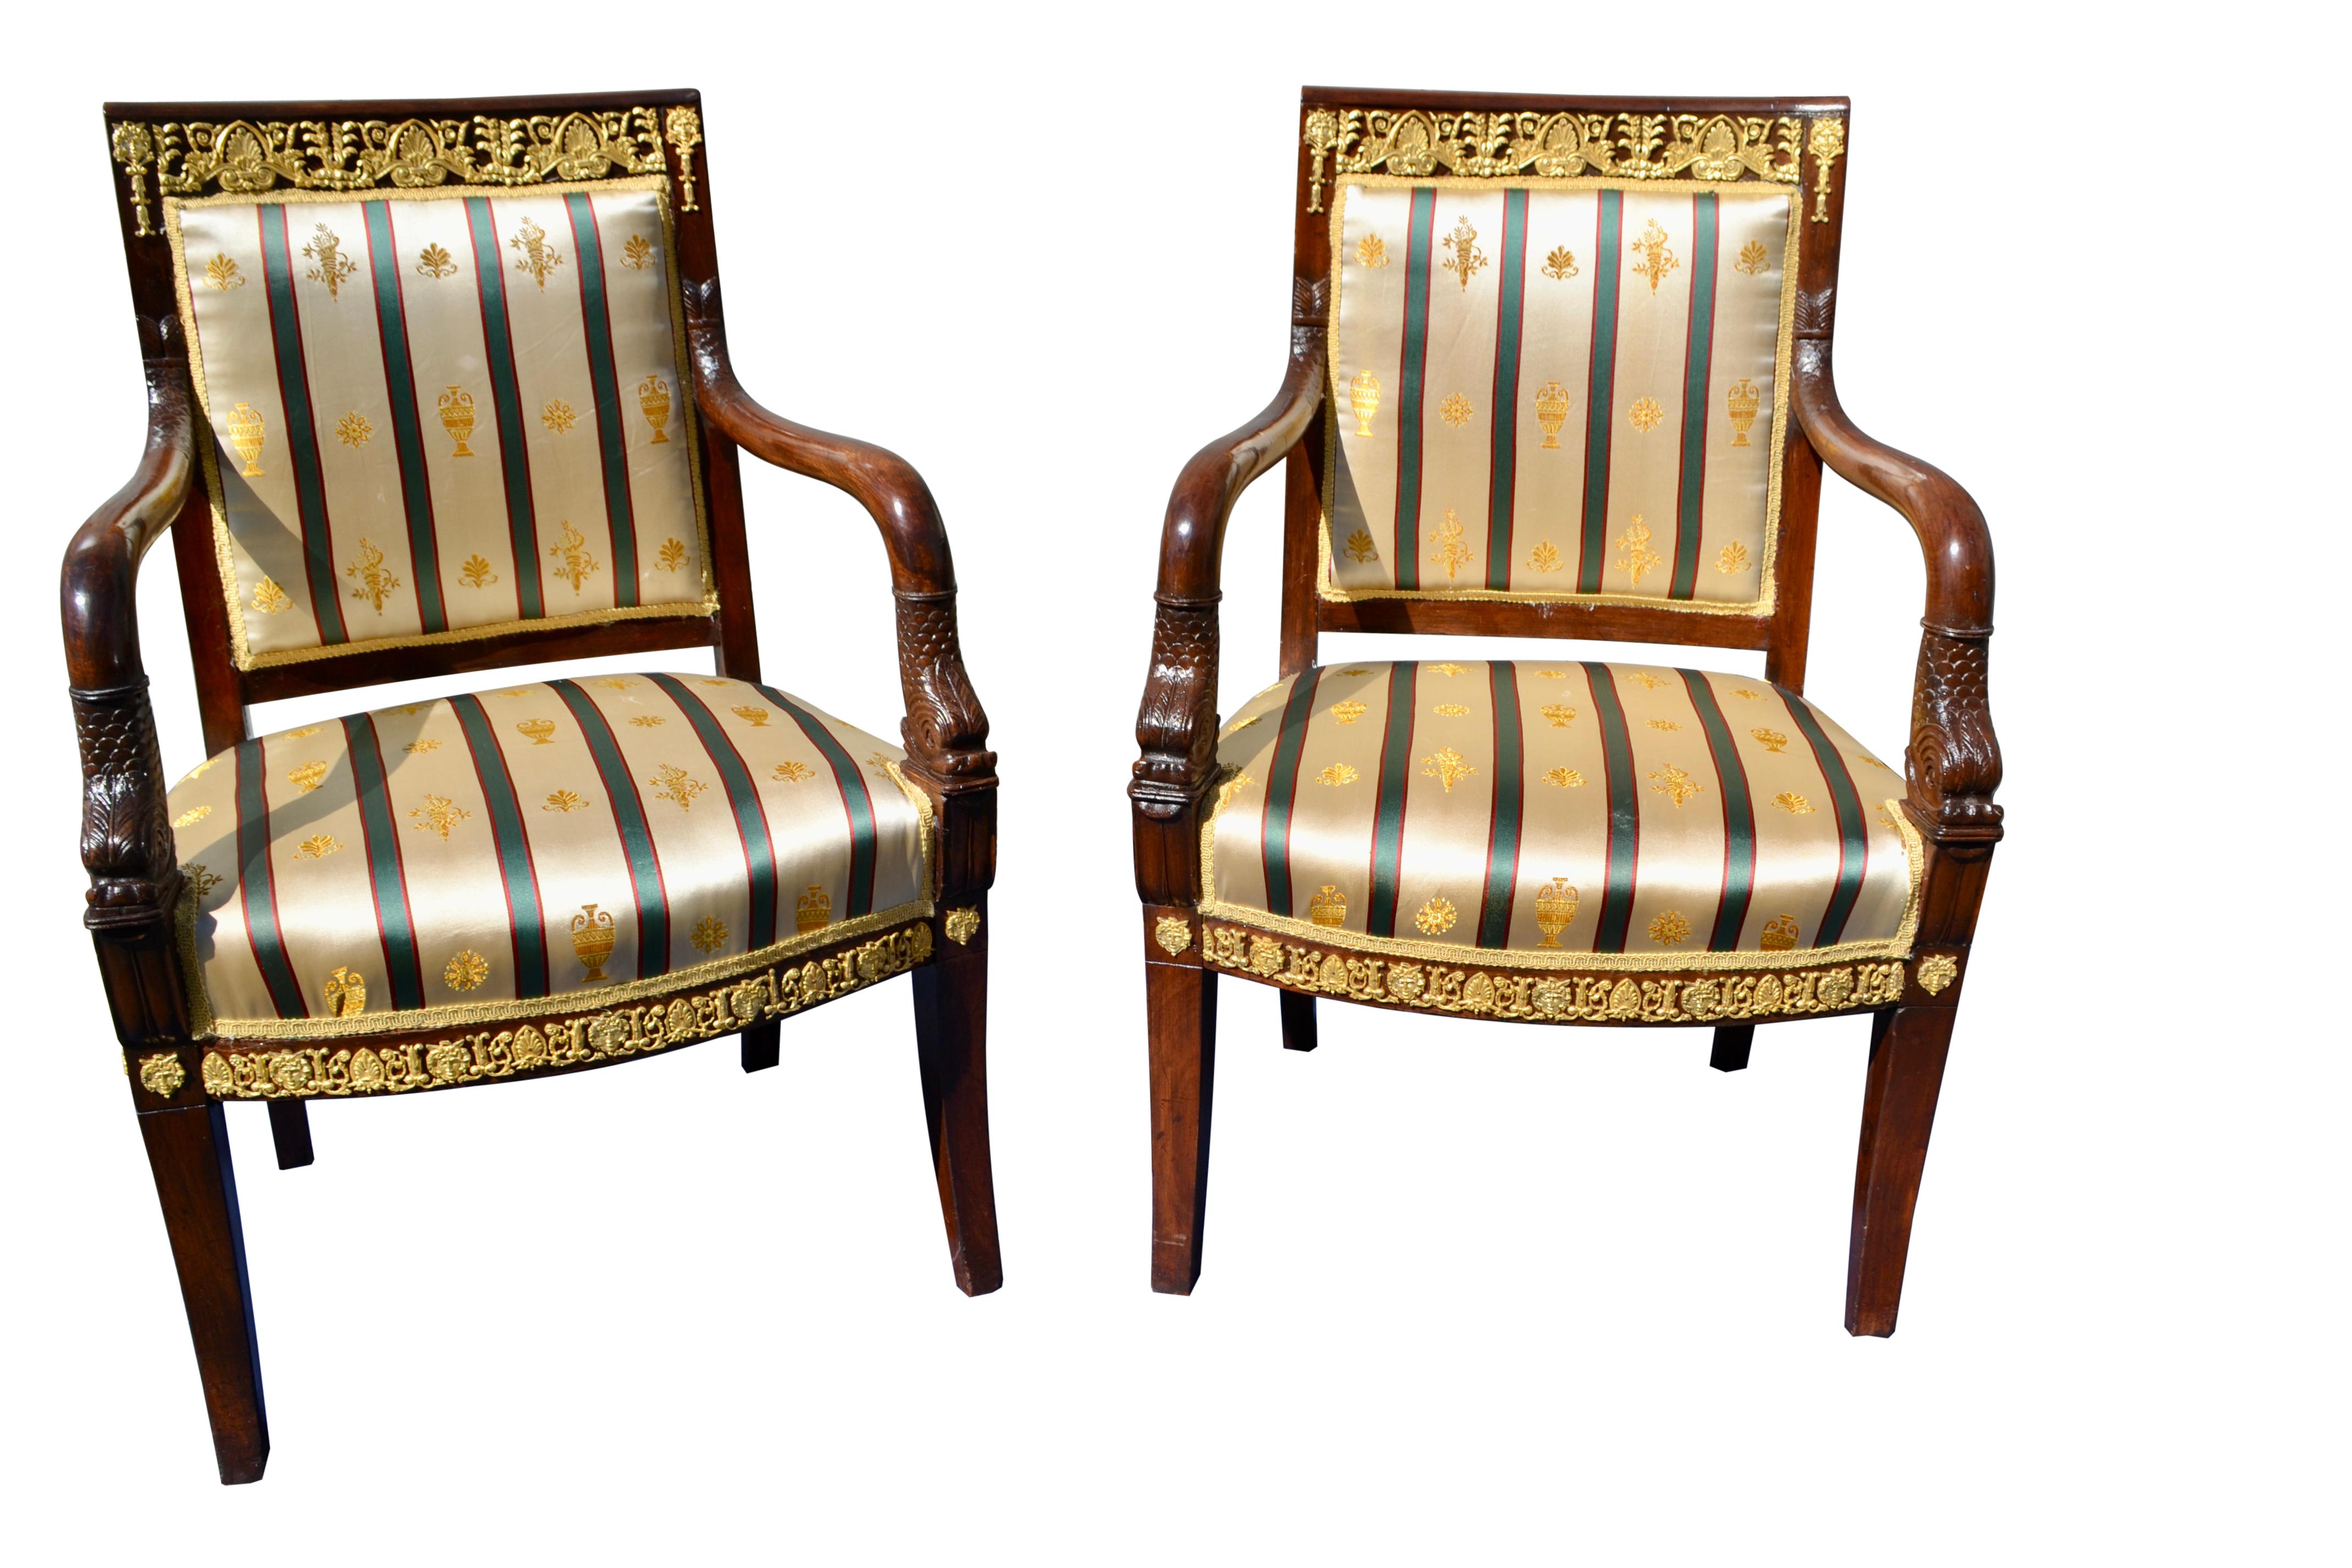 A striking pair of late French Empire mahogany armchairs, highly decorated with gilded bronze mounts on the upper back rail and all round the bottom of the seat as well. The curved open front arms terminate in carved dolphins. The chairs have been